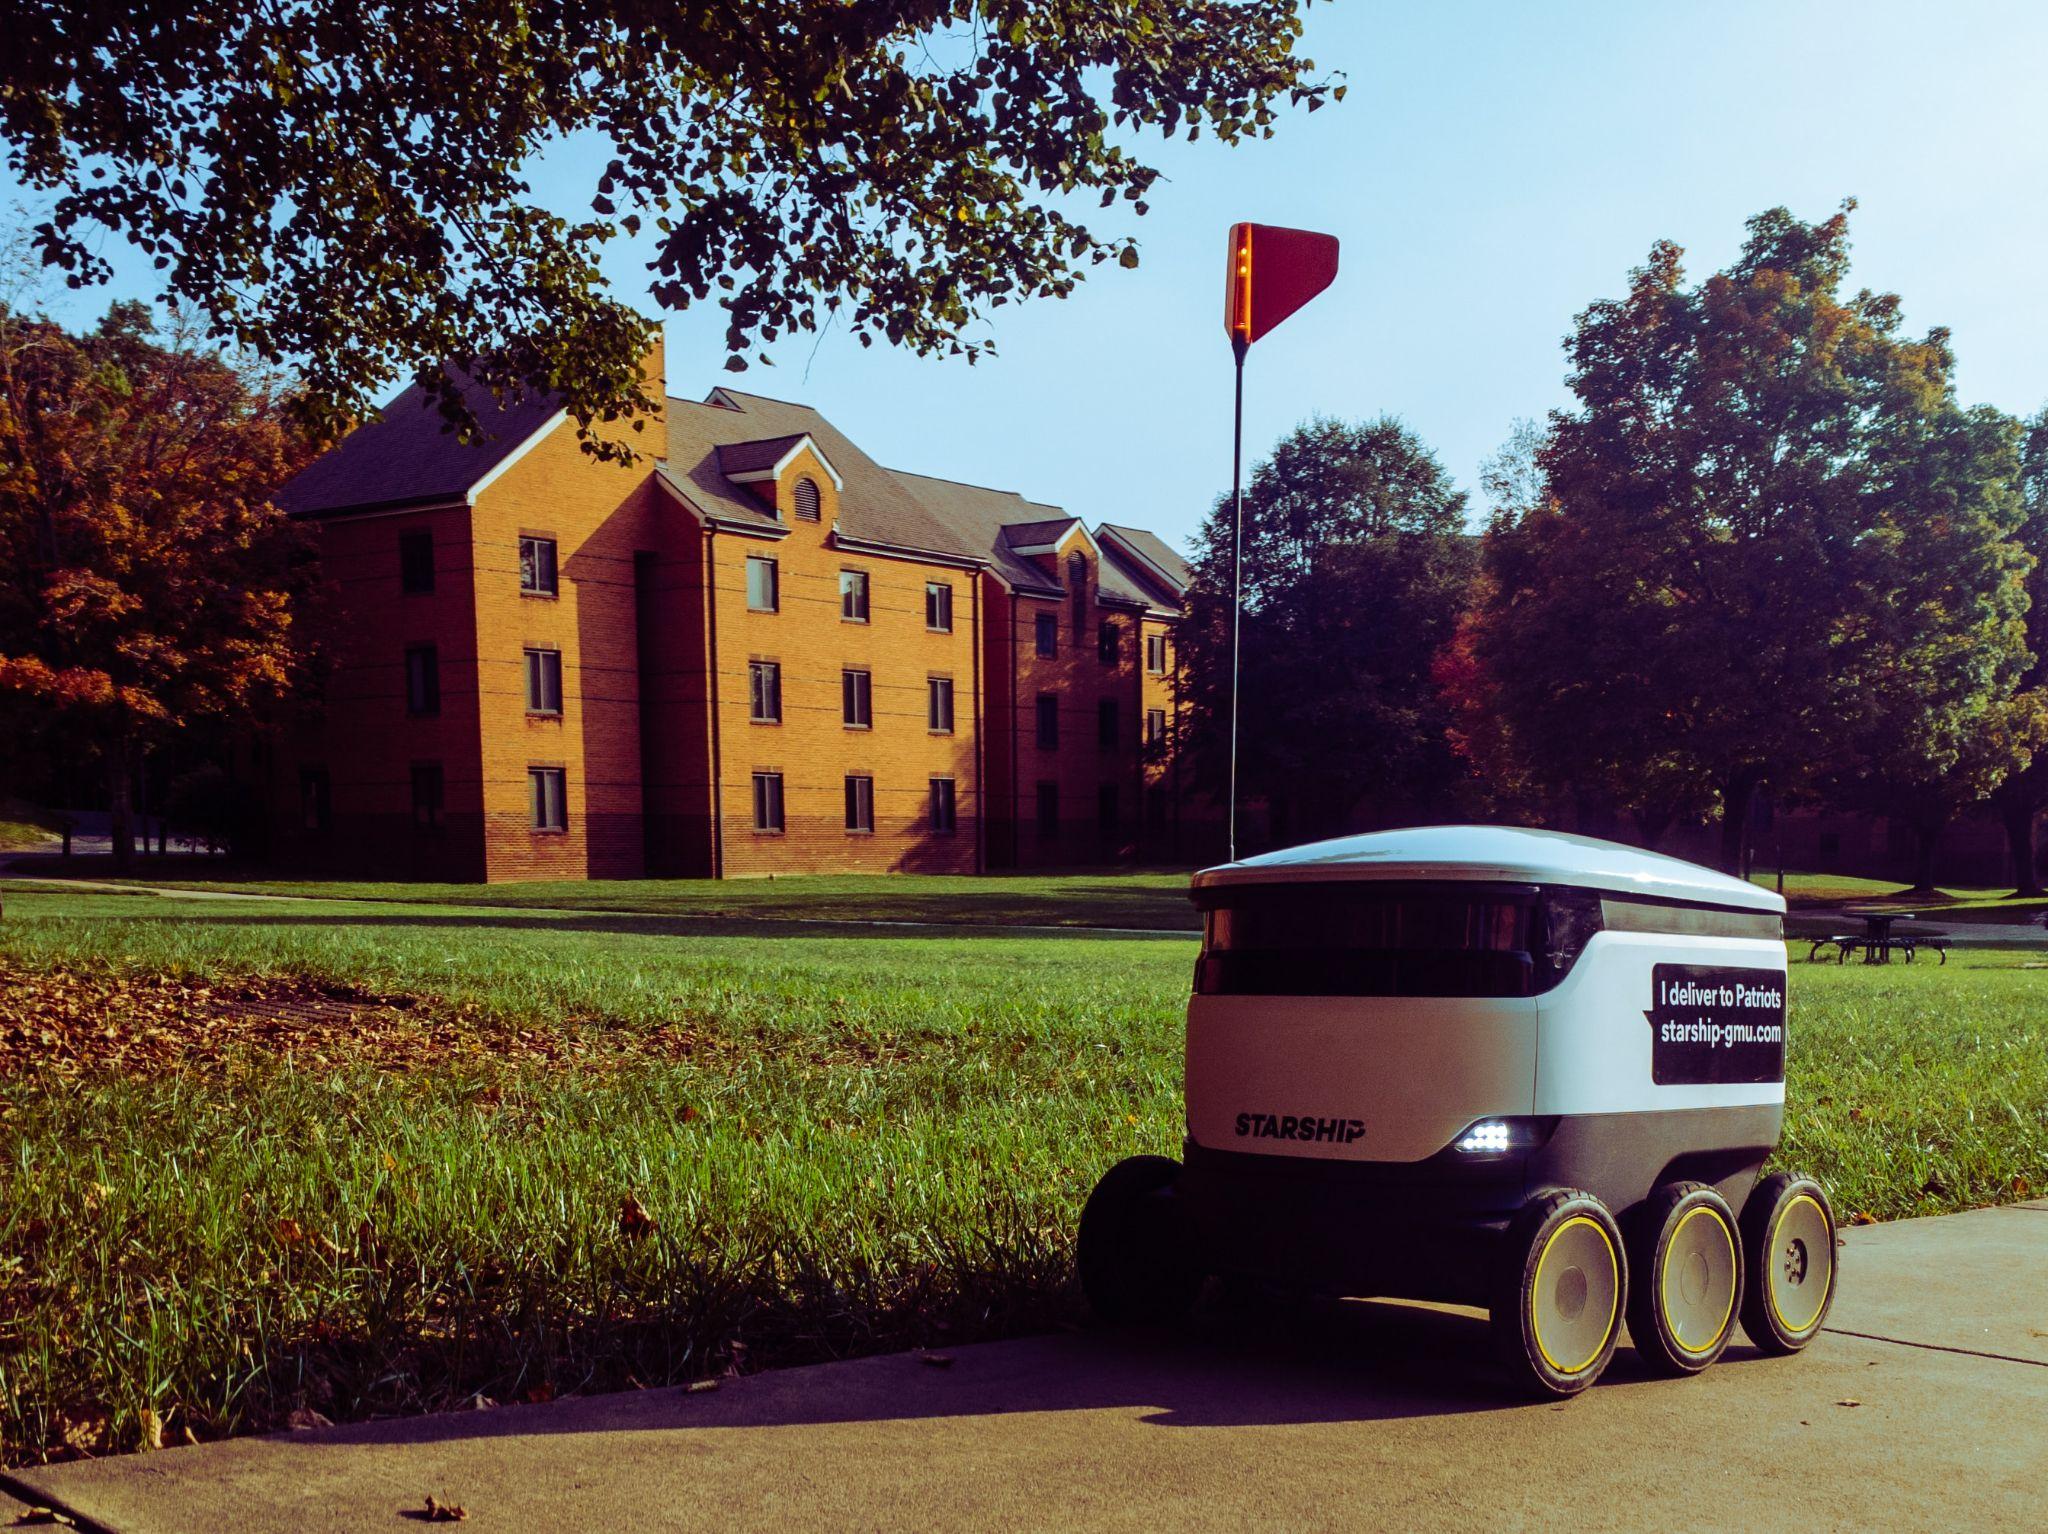 Delivery robots: hype or reality?